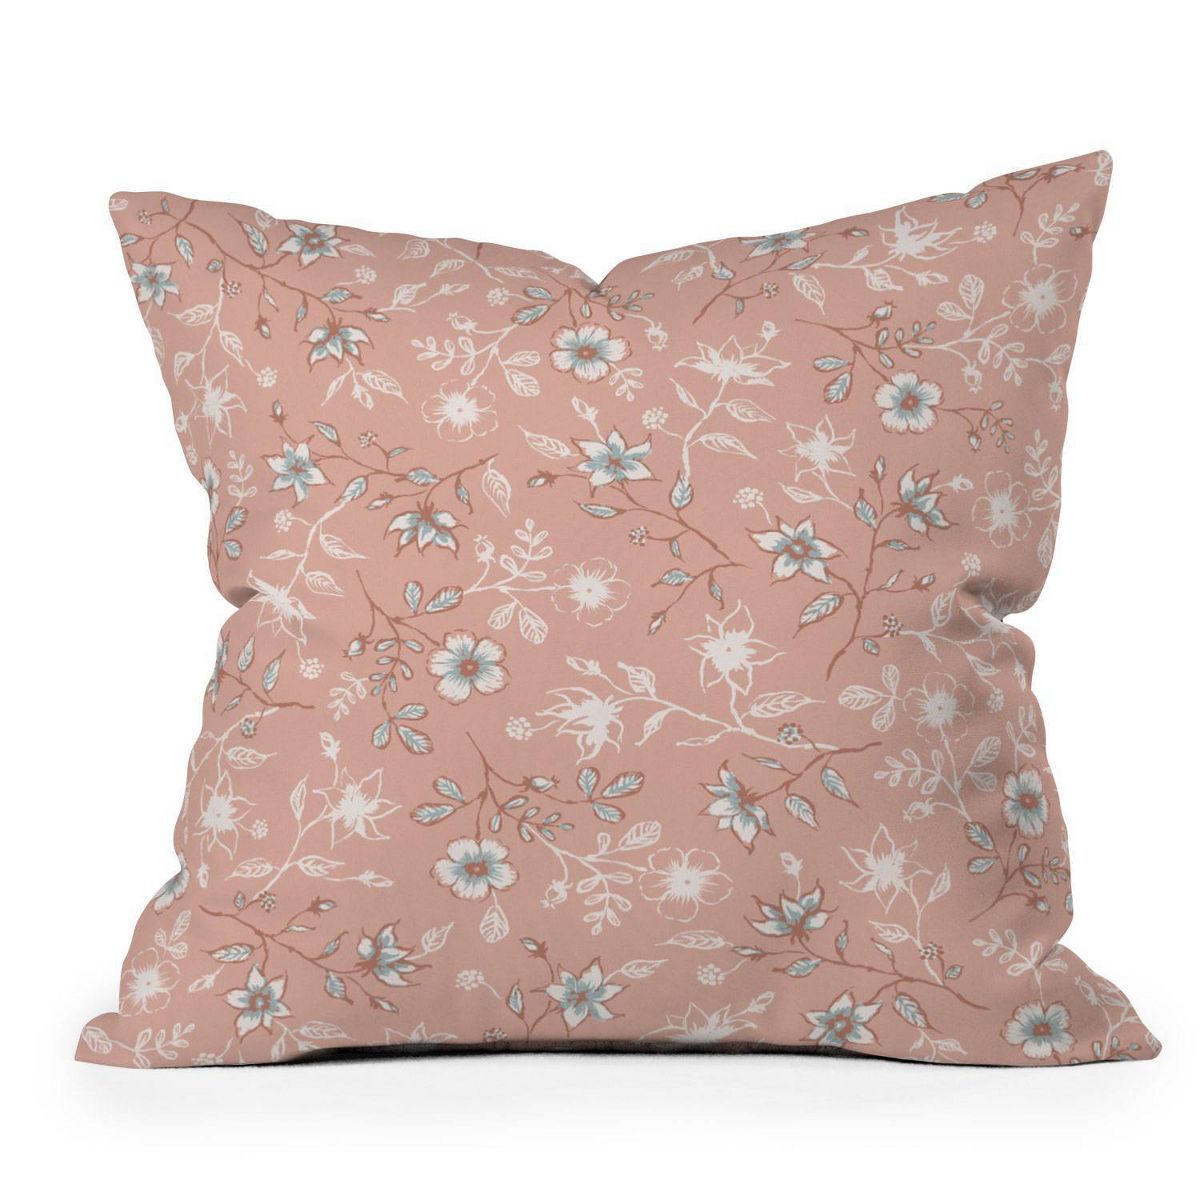 16"x16" Wagner Campelo Villandry Floral Square Throw Pillow Pink - Deny Designs | Target